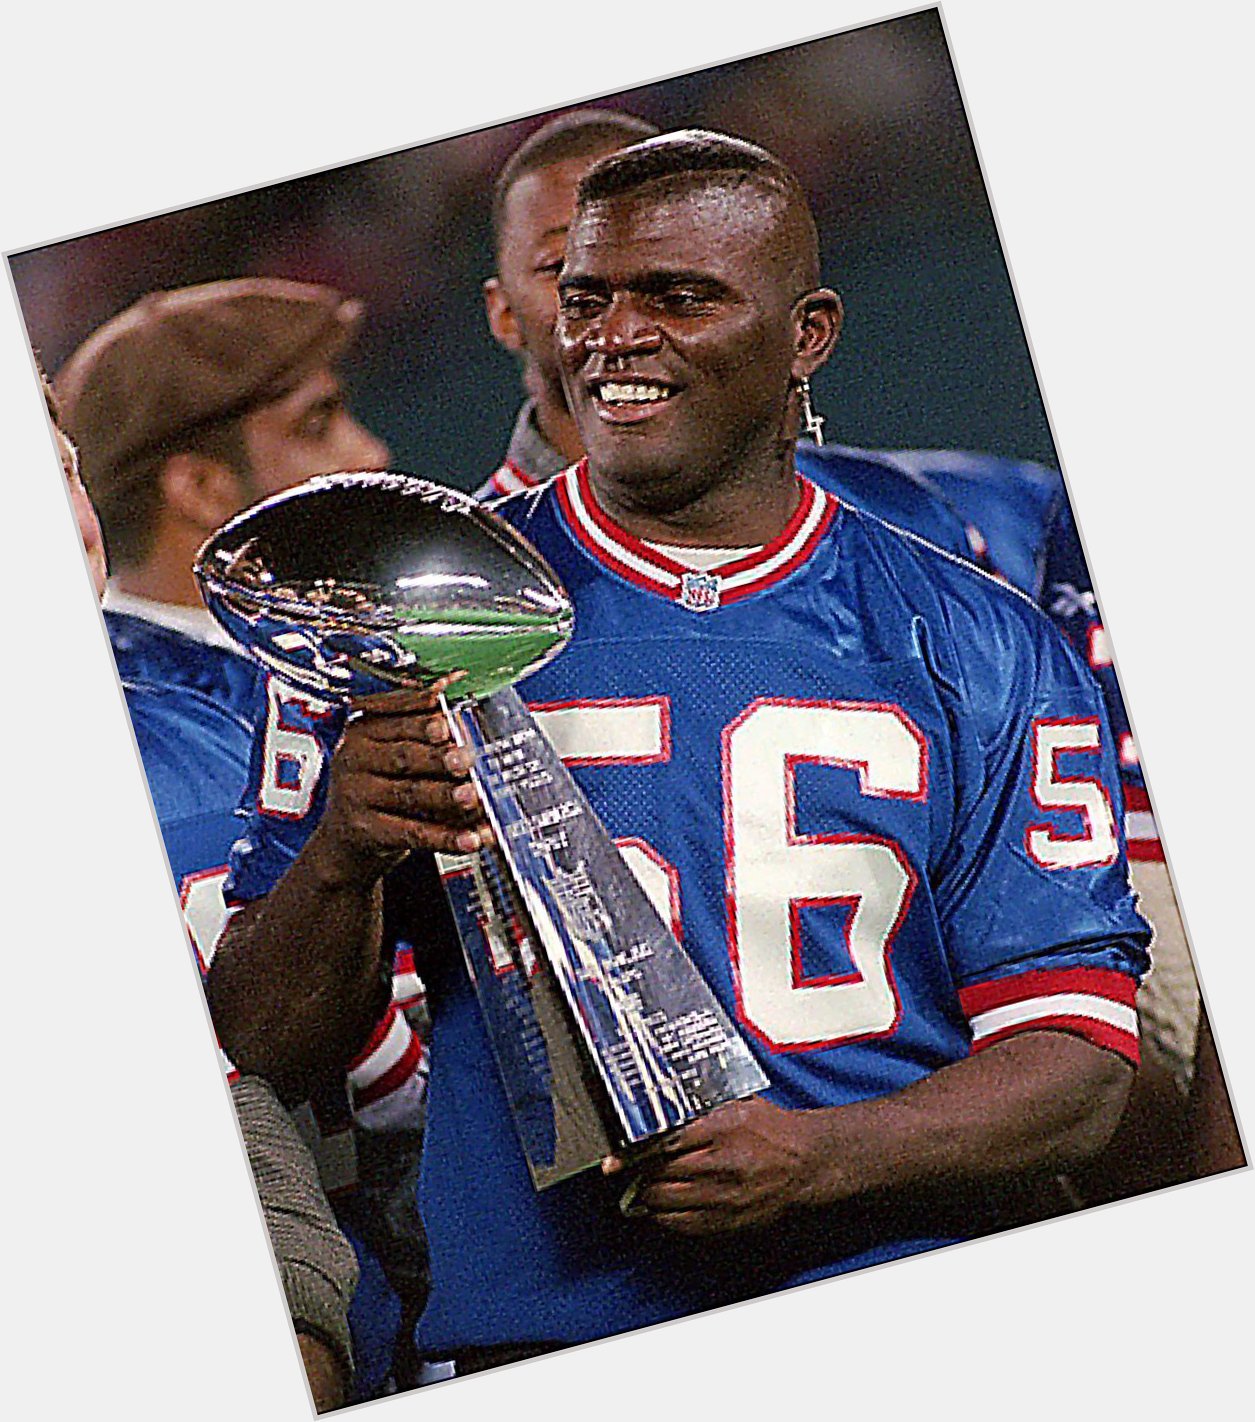 Happy Birthday to the goat Lawrence Taylor! legend 